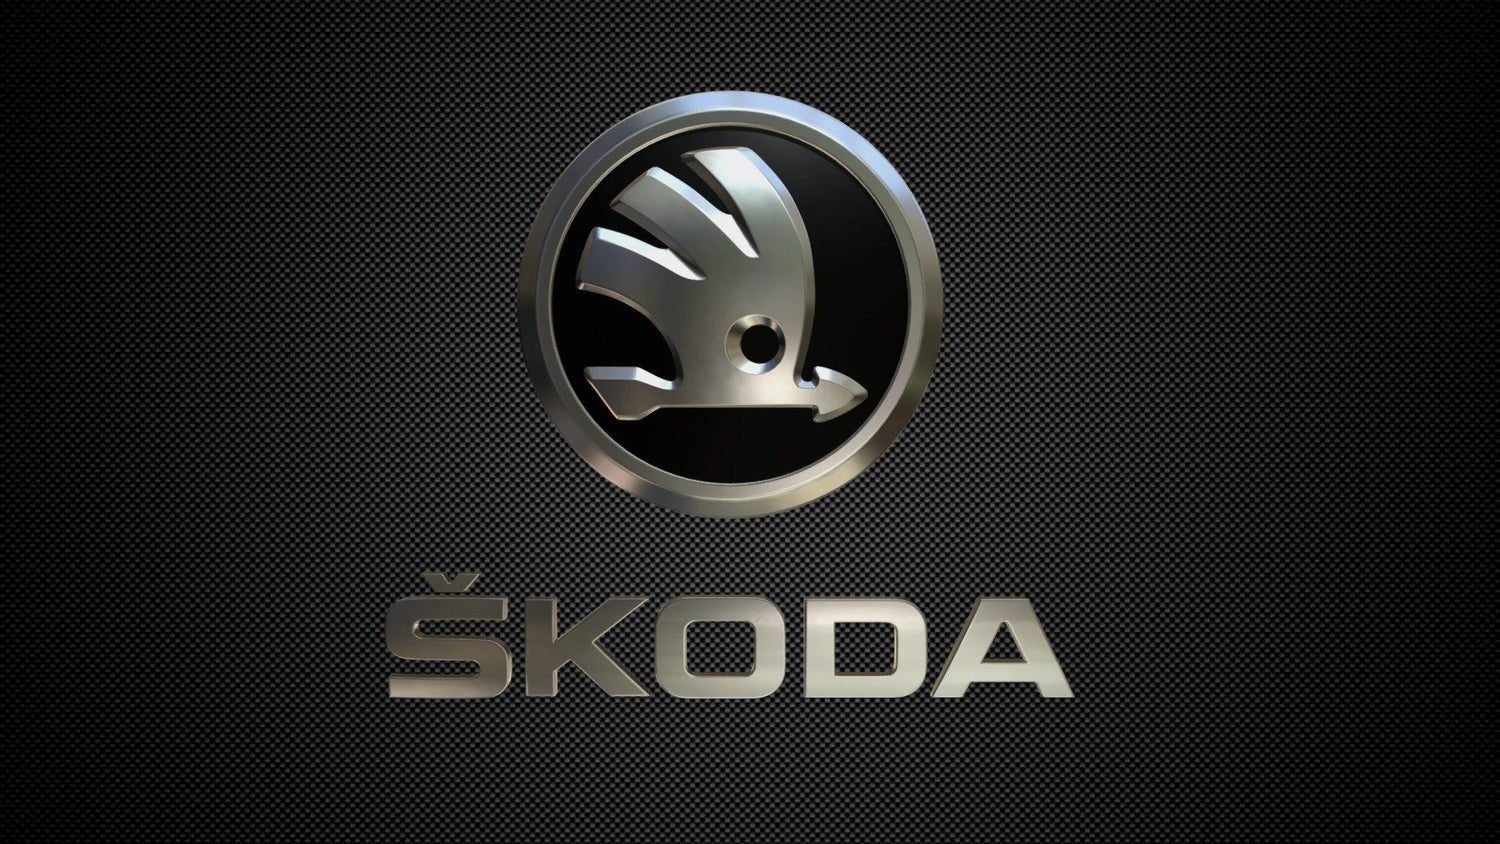 Skoda | Electric Car Charger EV Cables for Skoda type 1, type 2 and Portable Charging Cables